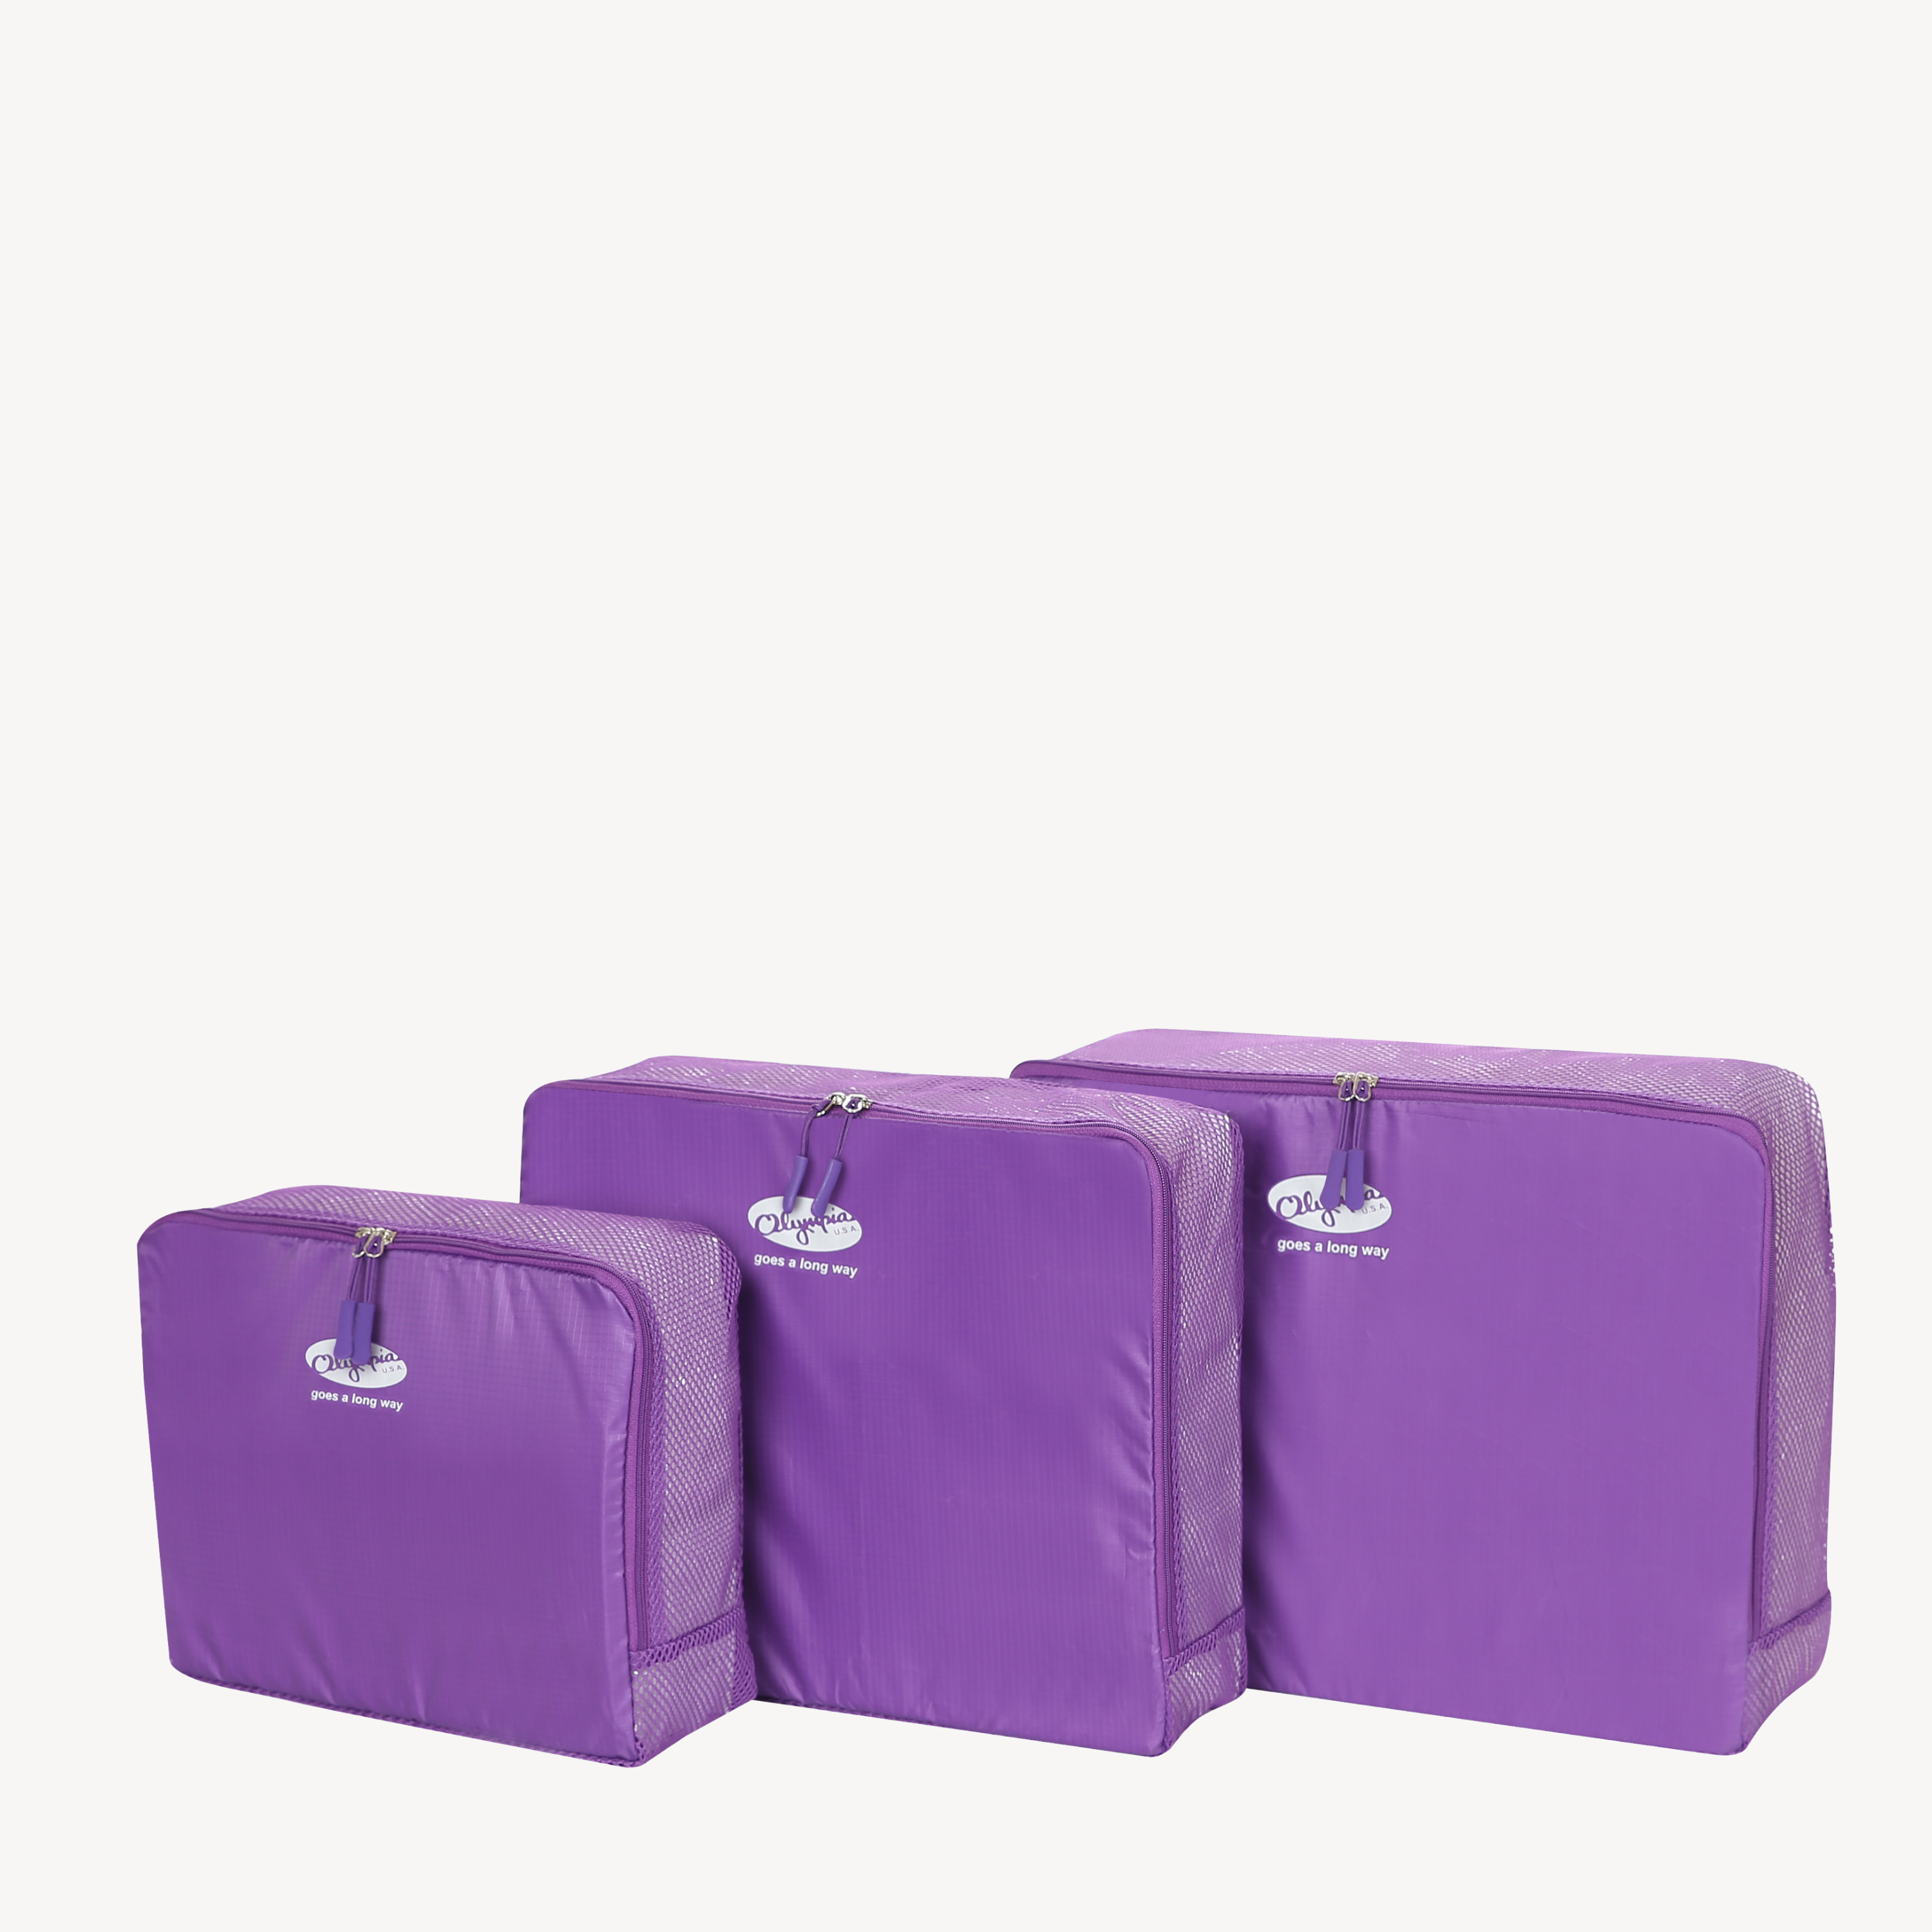 Apache Carry-On and Organizing Pouch set